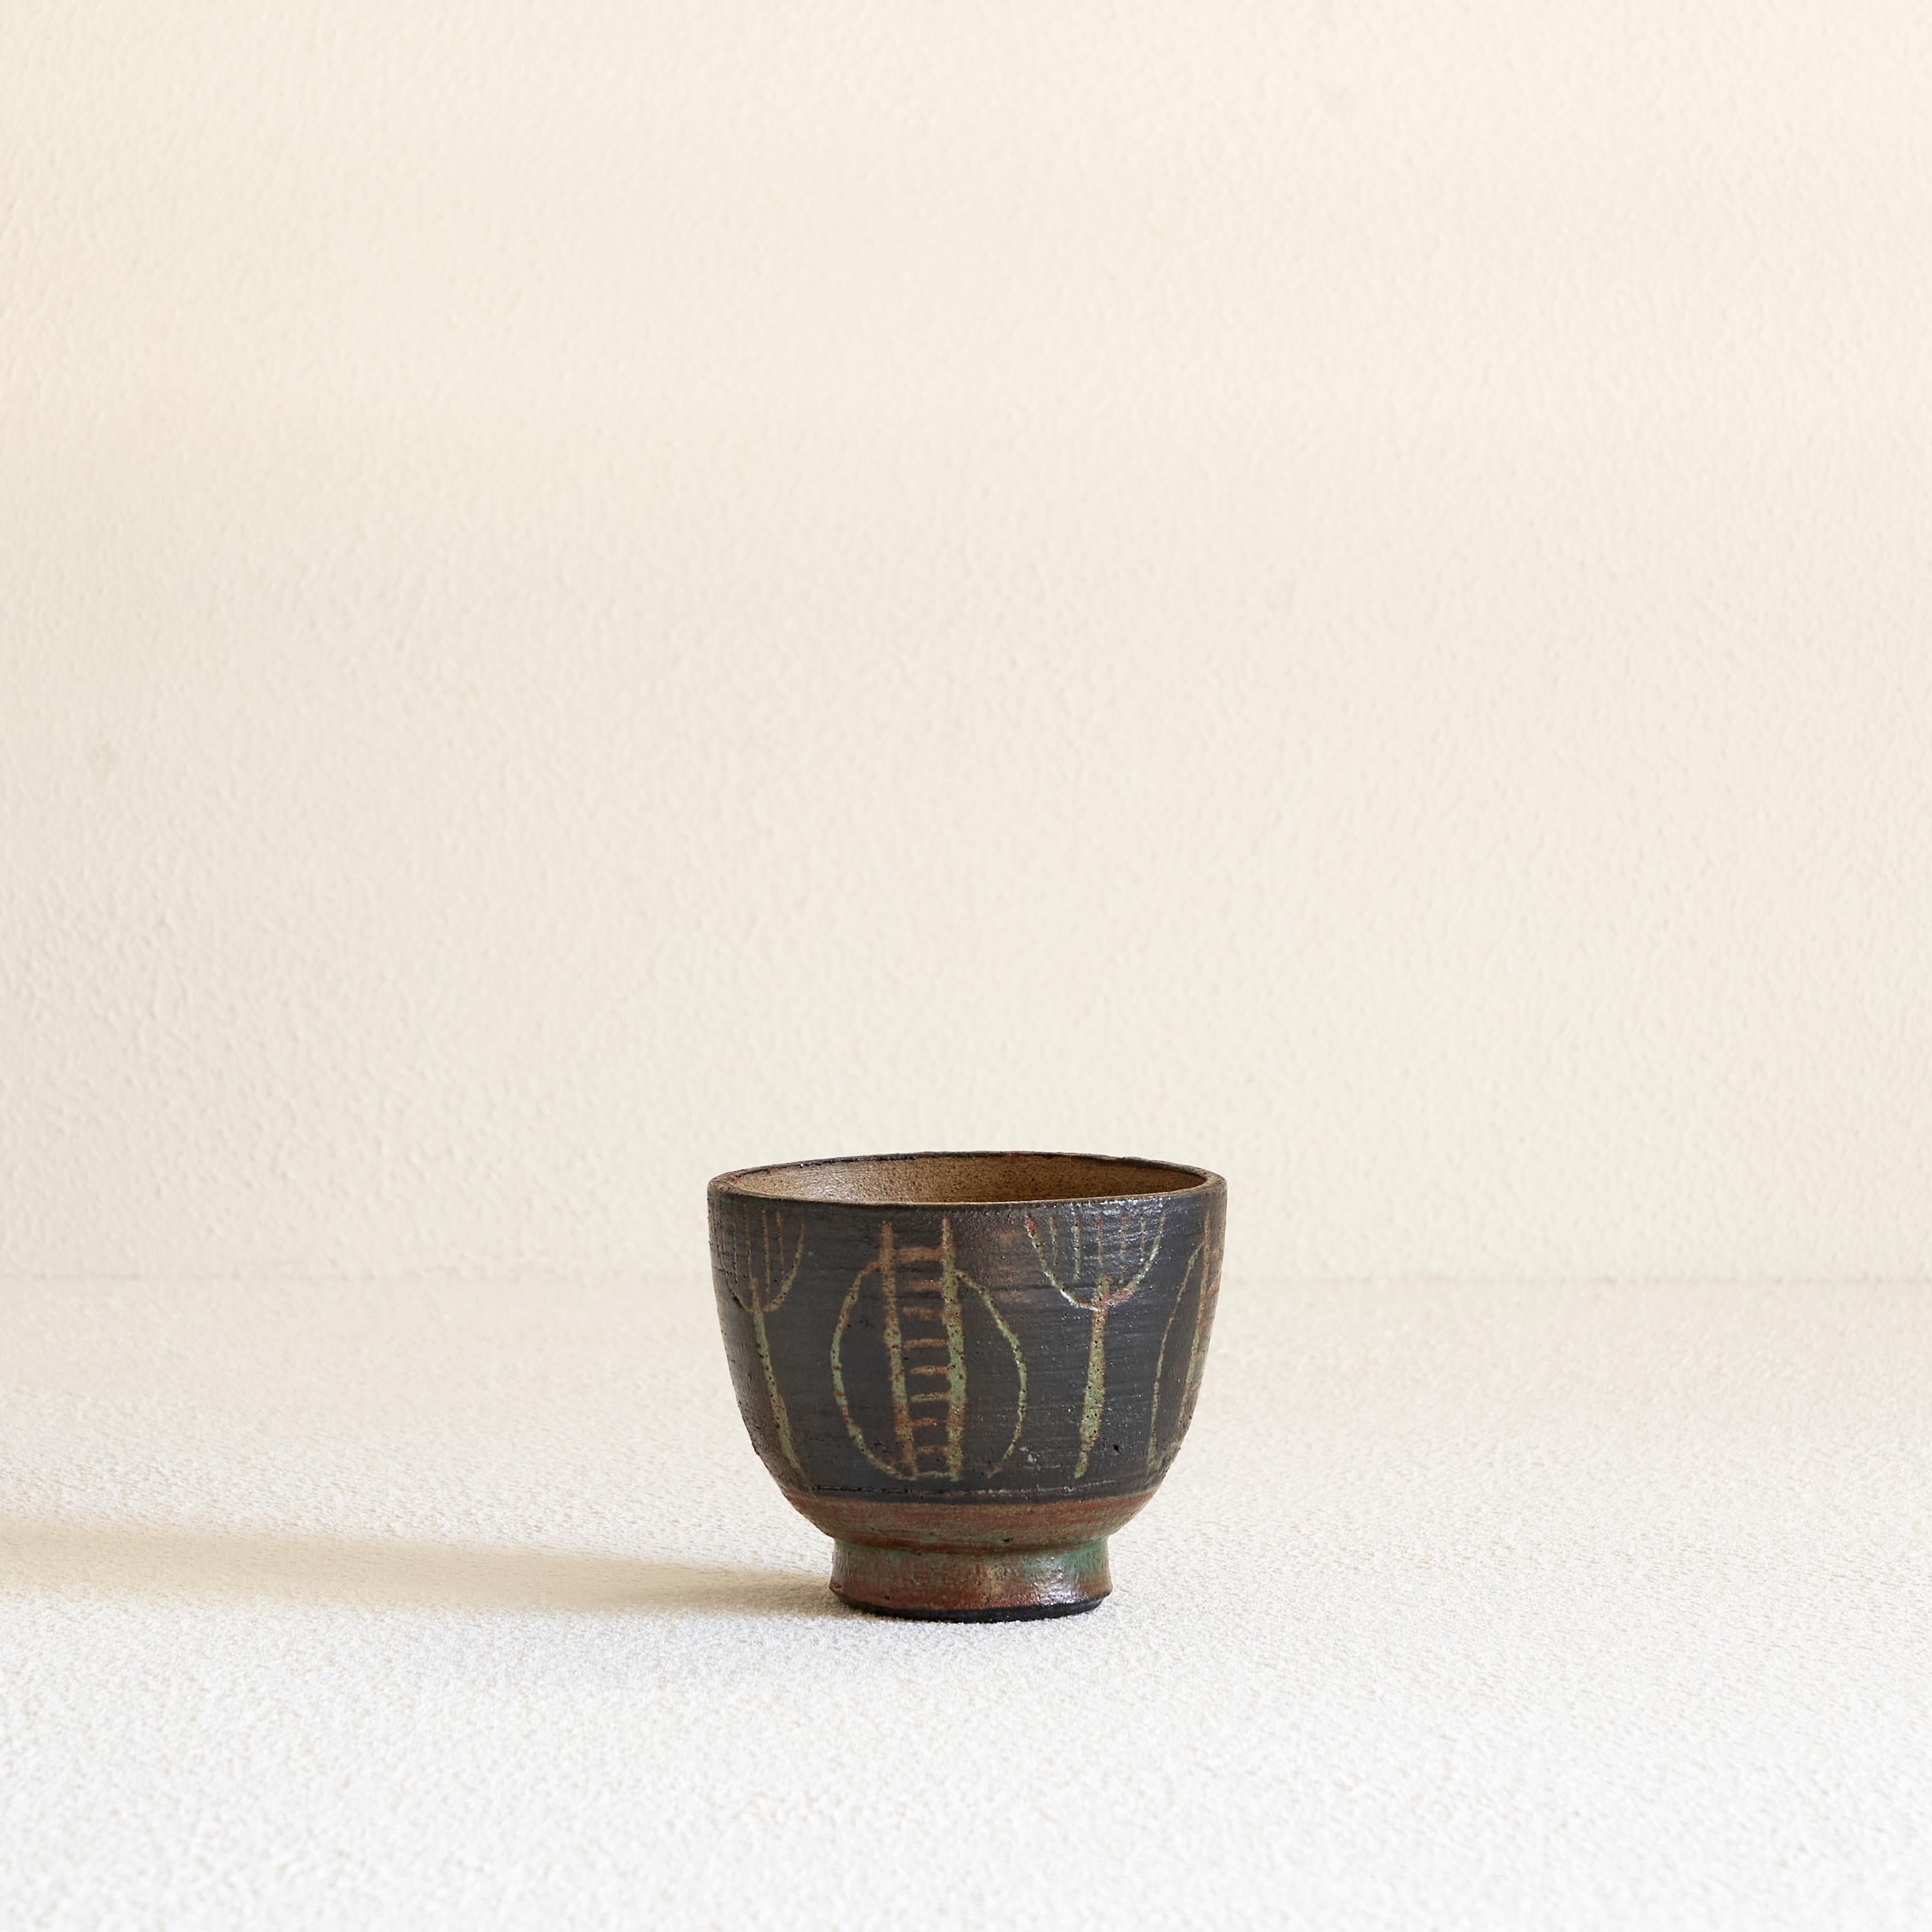 Hand-Crafted Wim Fiege Mid-Century Modernist Studio Pottery Bowl, 1950s For Sale